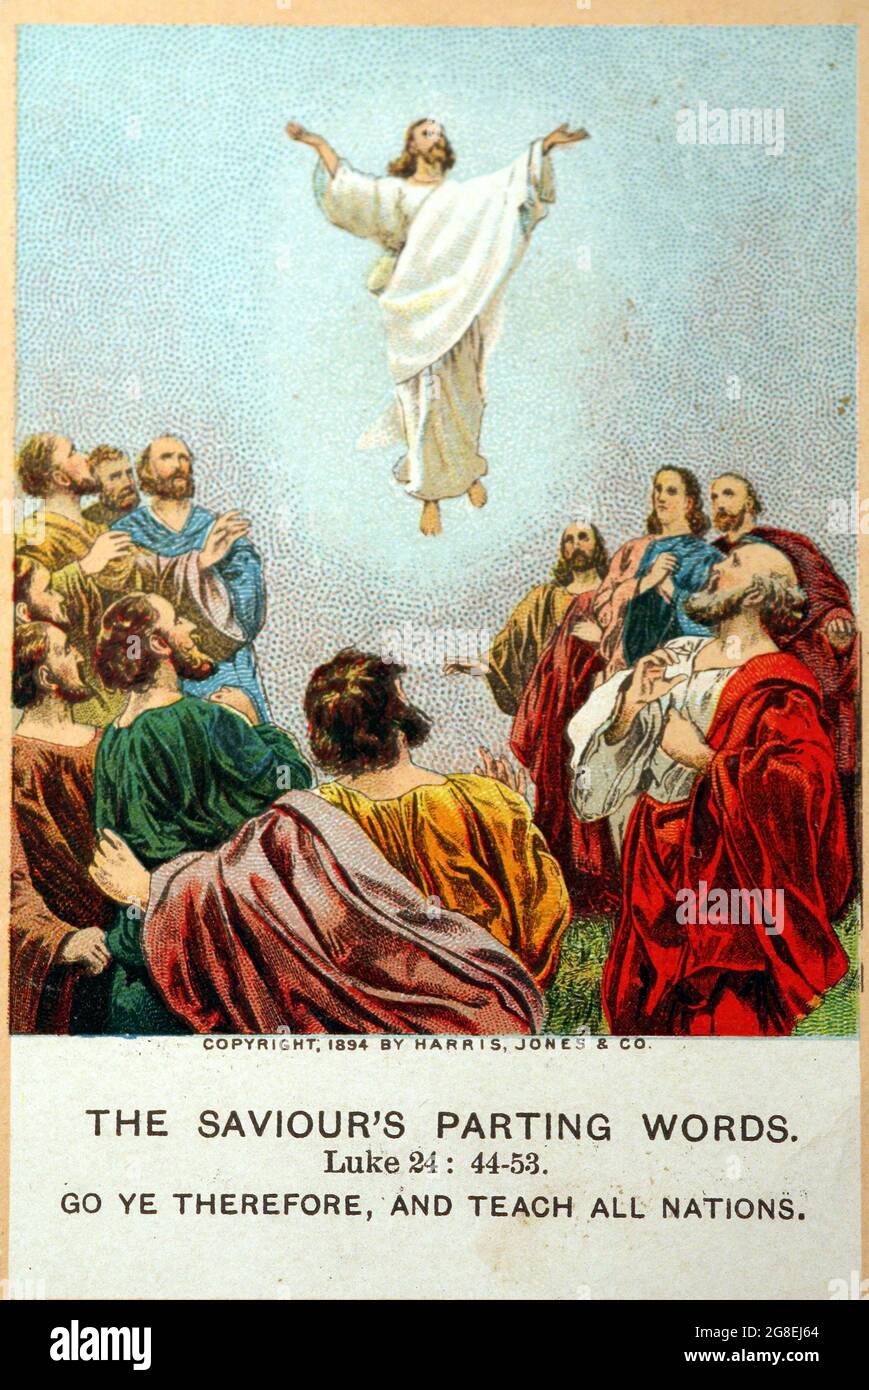 Ascension Jesus parting words as he ascended into Heaven: Luke 24:44-53. Old bible card. Stock Photo